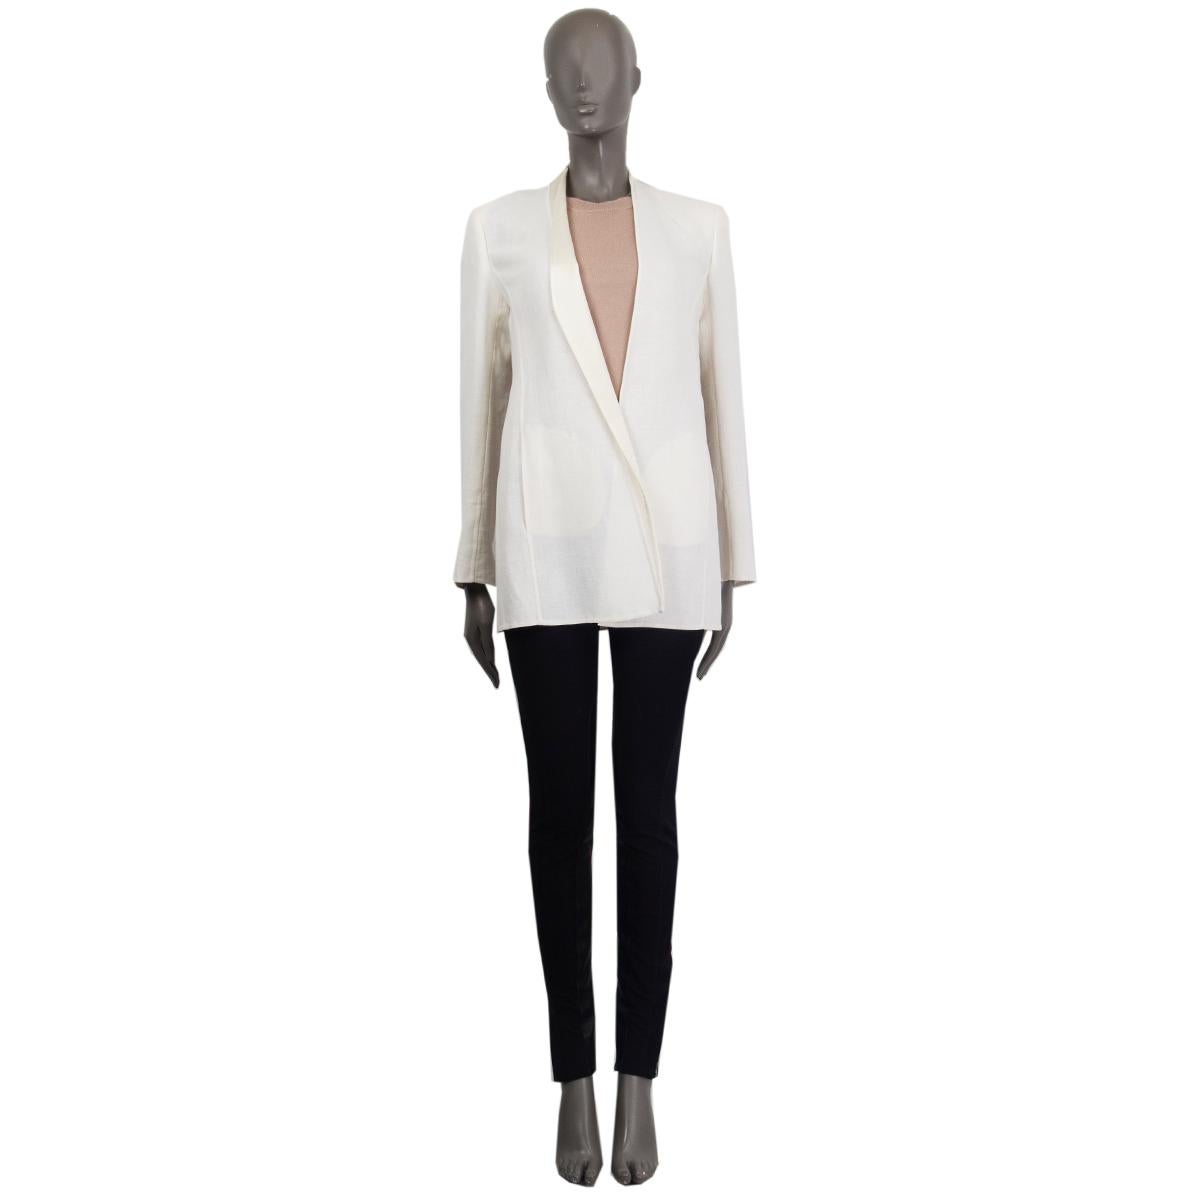 100% authentic Akris asymmetrical collar open blazer in off-white linen (99%) and cotton (1%). Has two slit pockets. Partially lined in viscose (100%). Left side of the collar's sowing has come slightly undone, otherwise it is in good